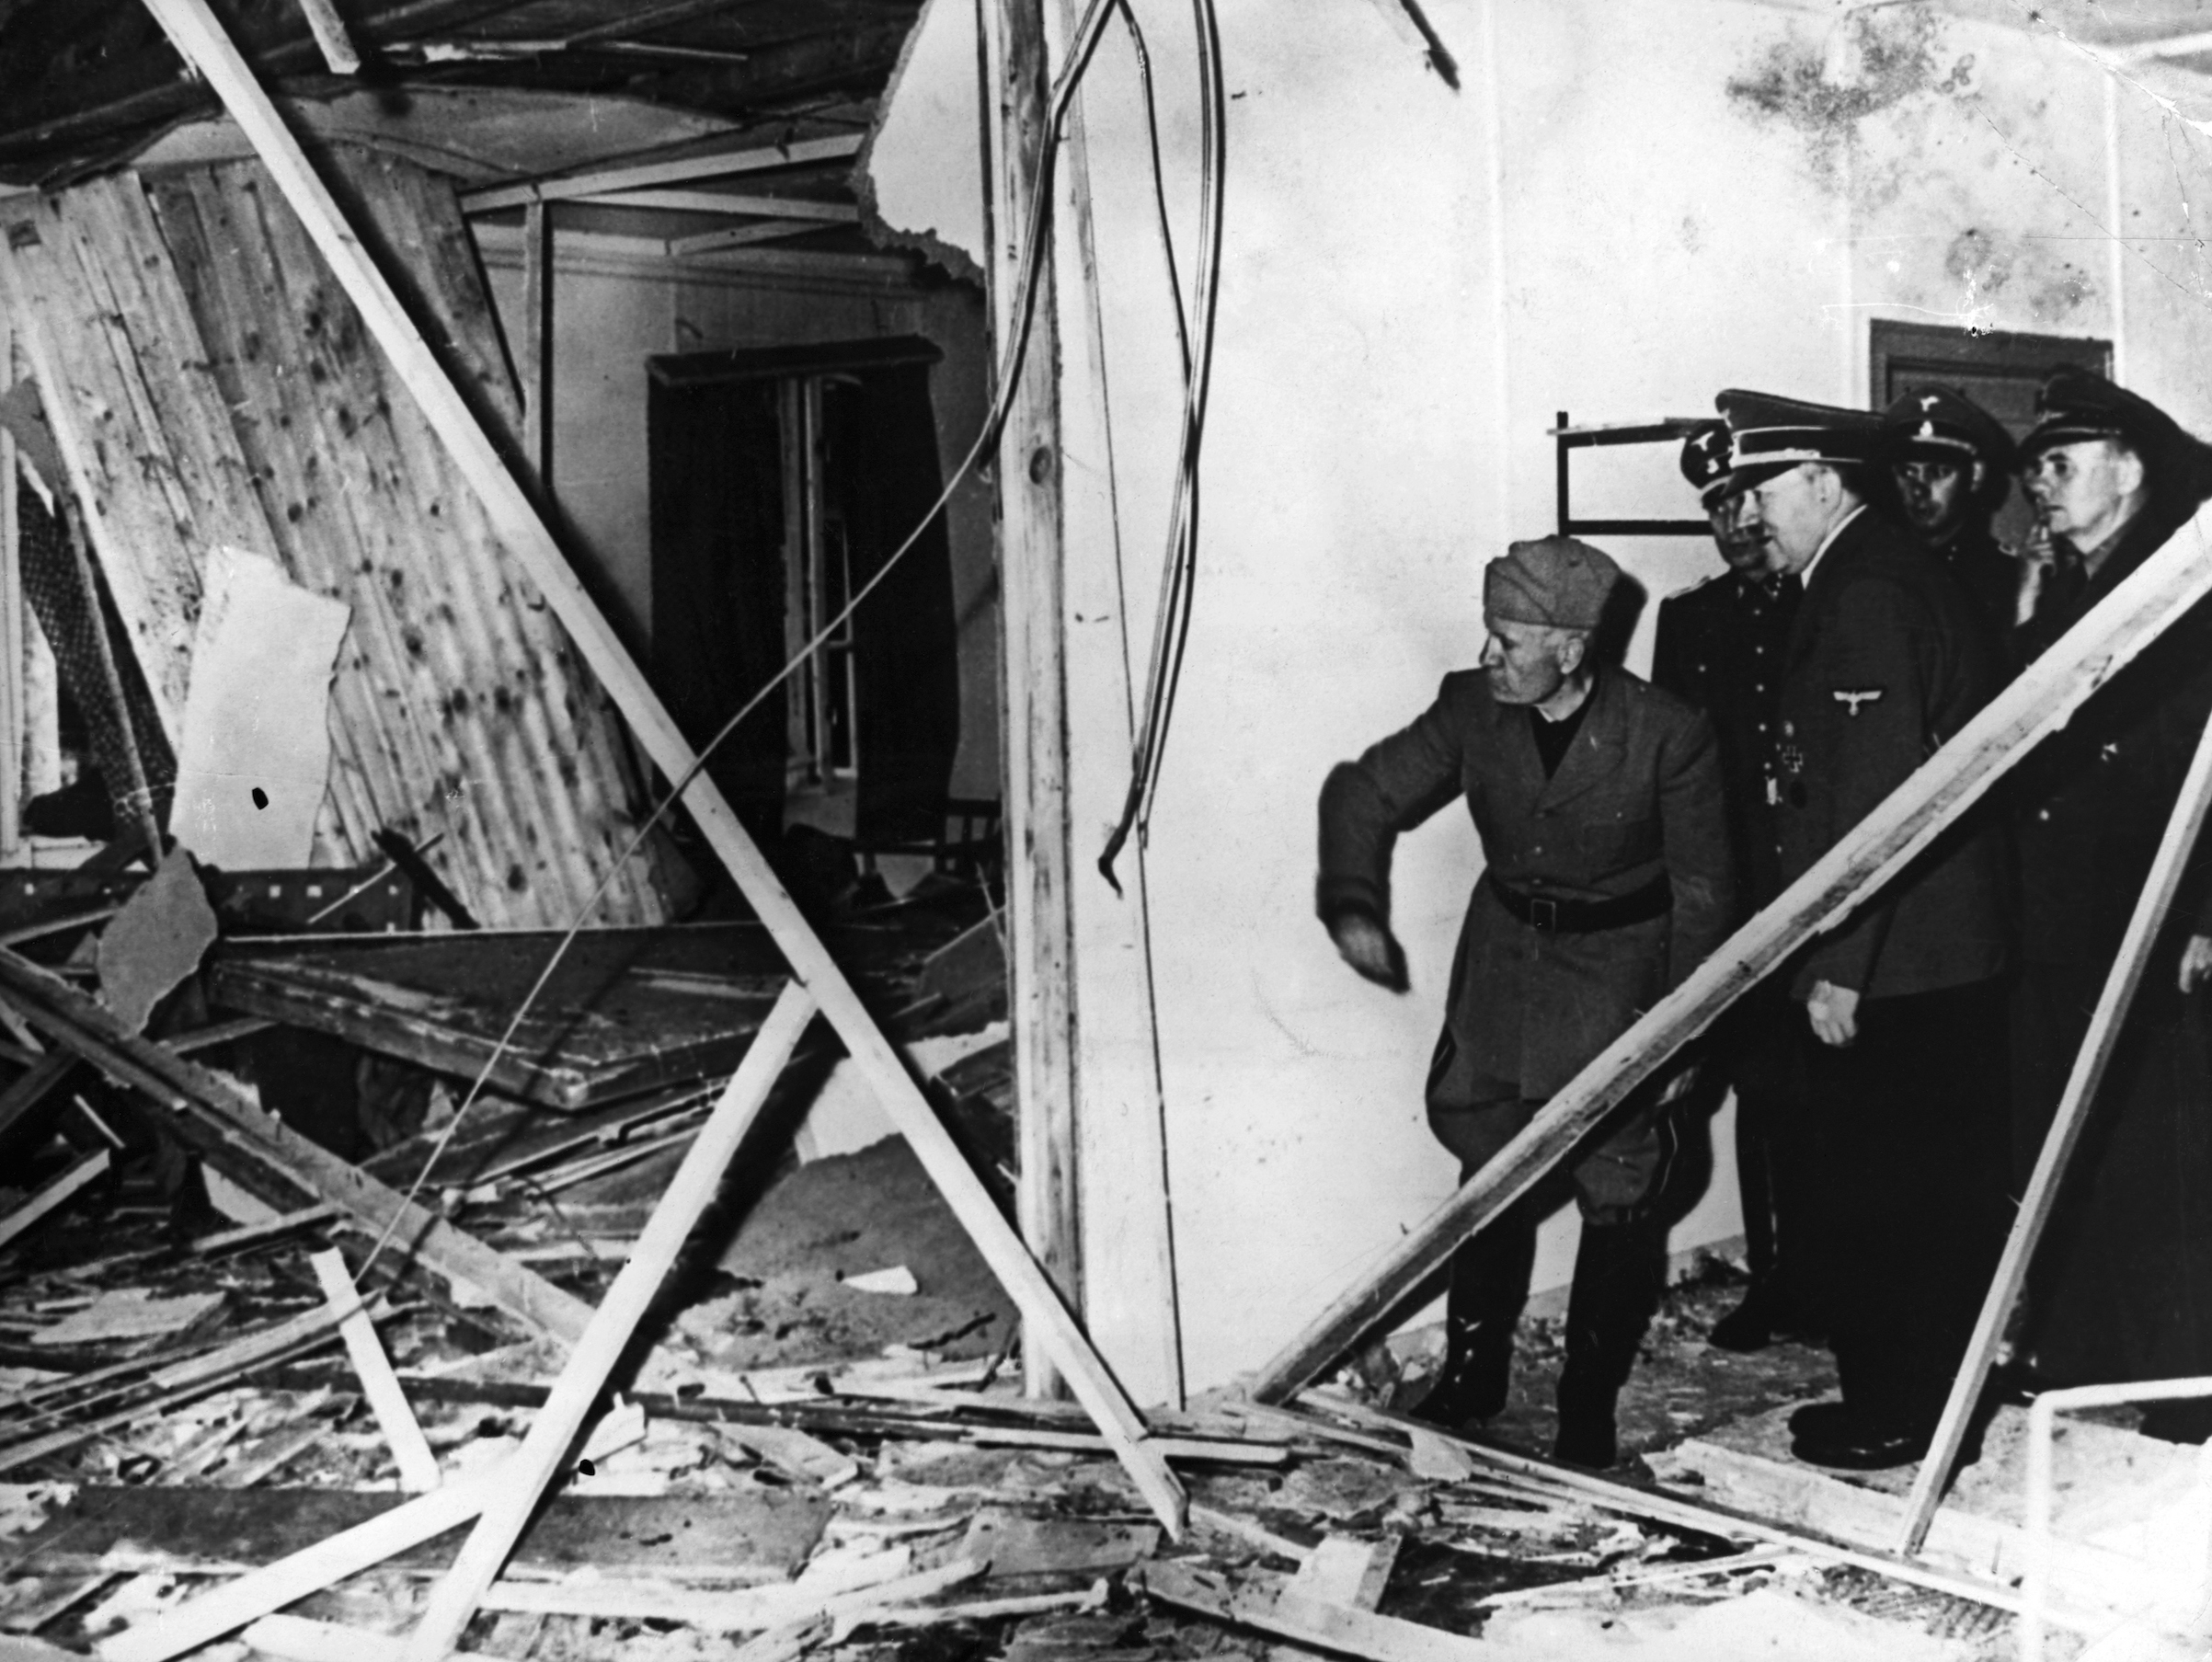 Adolf Hitler and Benito Mussolini visit Hitler's damaged headquarters in East Prussia after an attempt on Hitler's life there in July 1944. Colonel Claus von Stauffenberg and several other high-ranking Nazi staff members planned and carried out the attempt, and were executed for it. (Hulton Deutsch/Corbis/Getty Images)